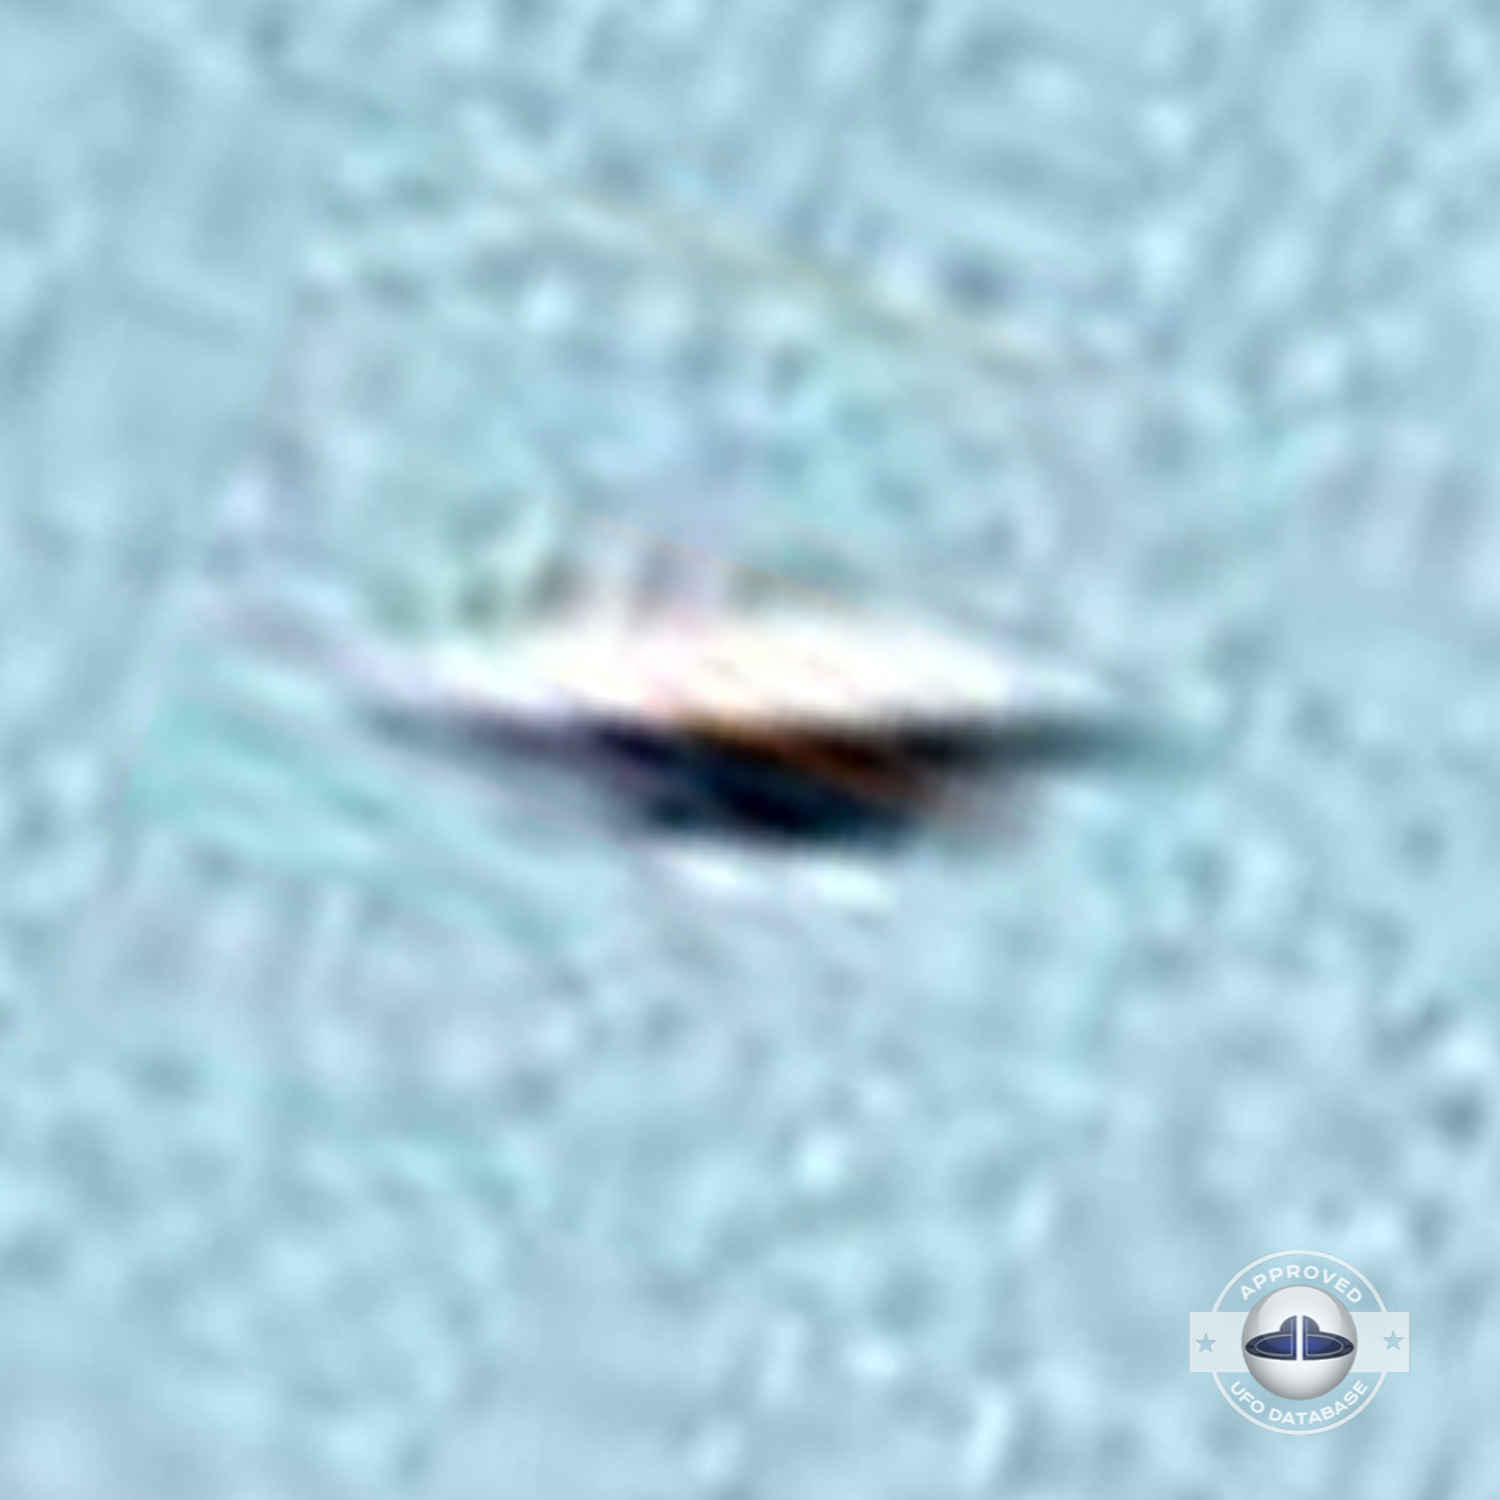 UFO picture shot in Plymouth Zoo which was located in Central Park UFO Picture #132-7